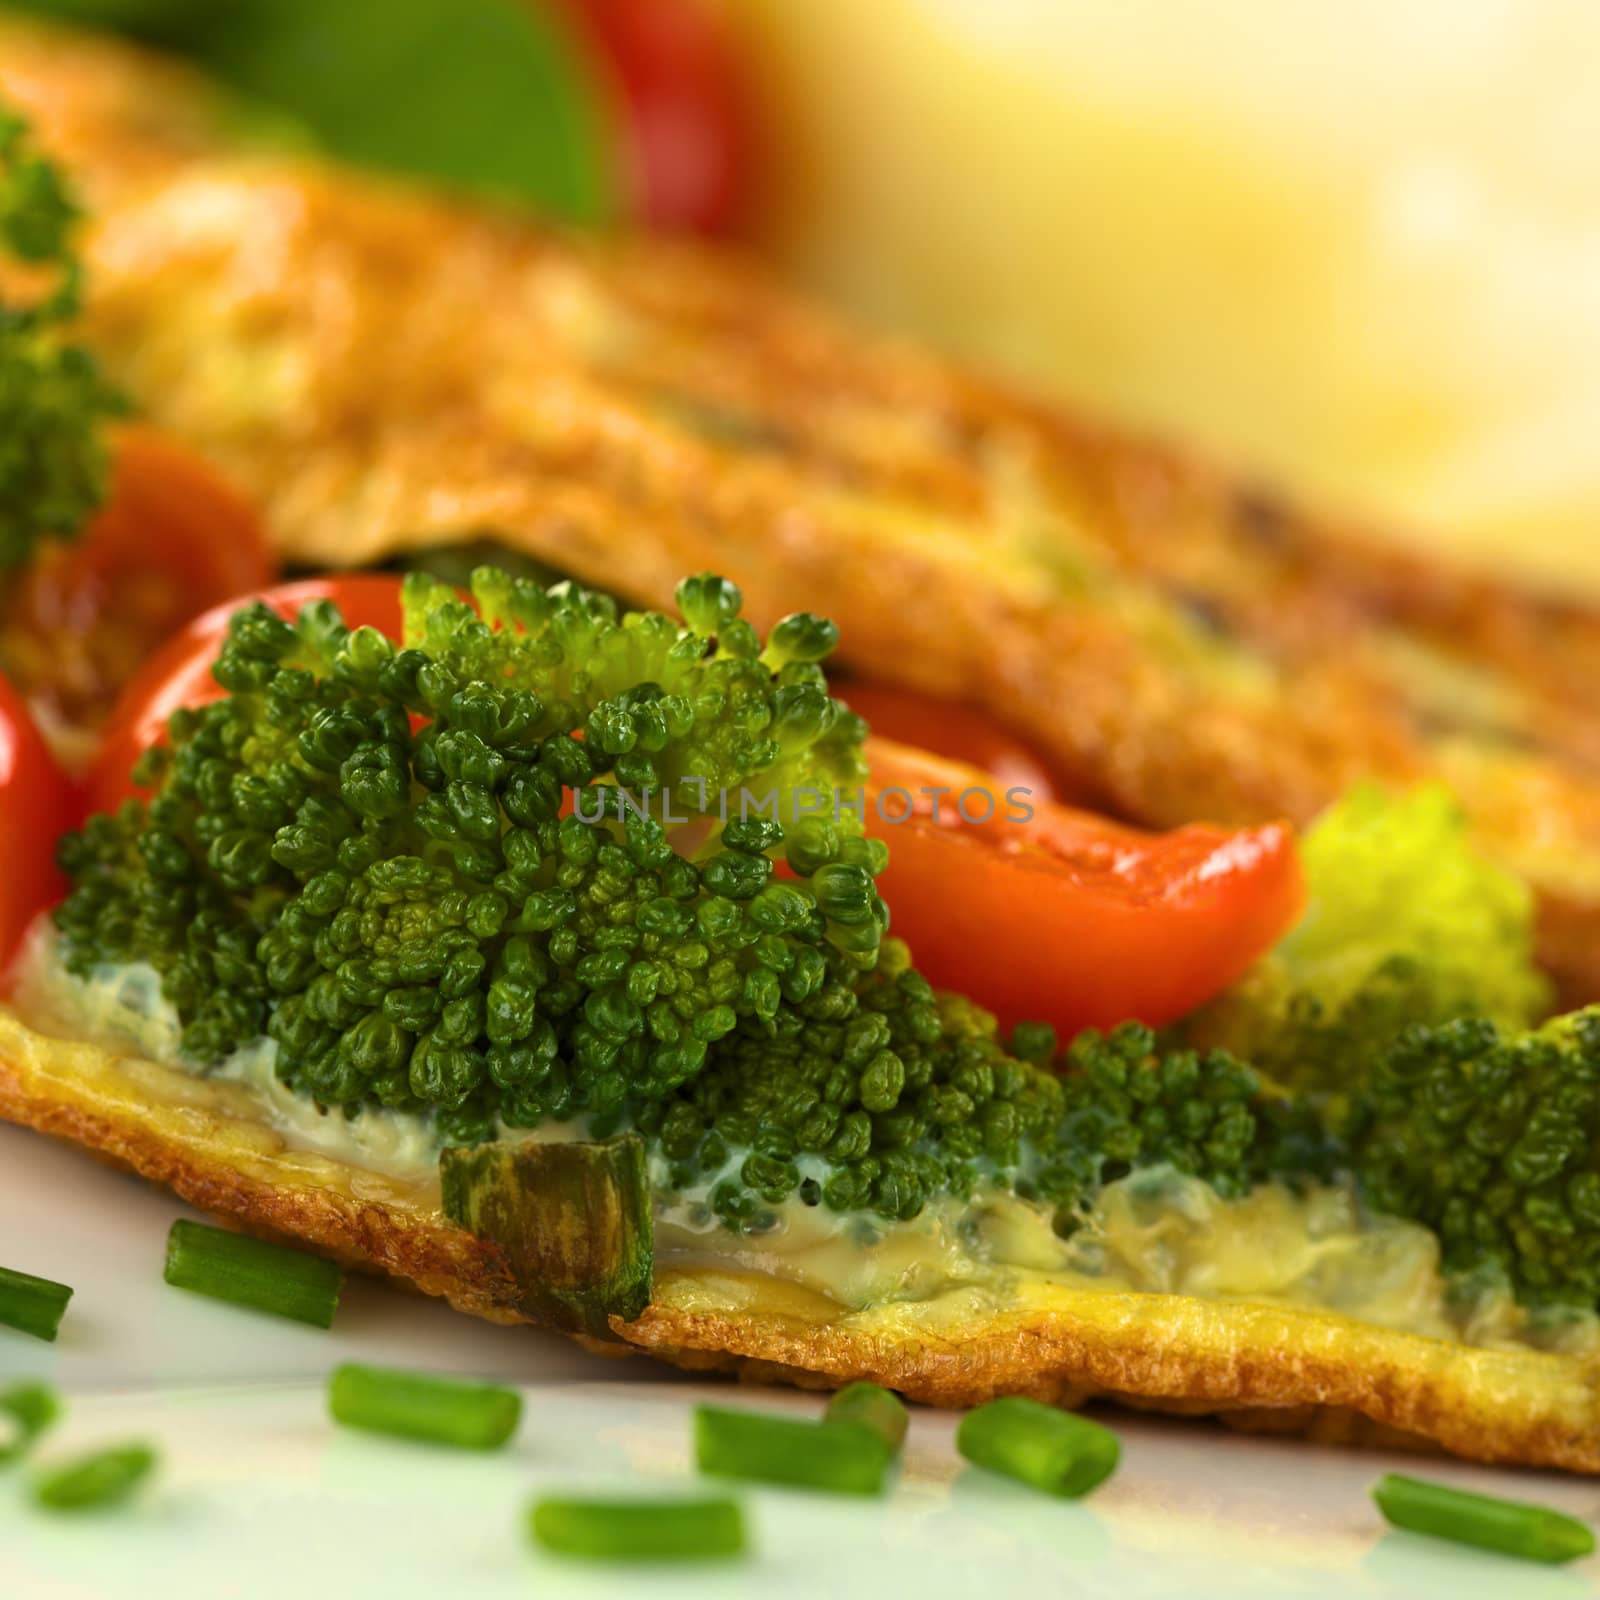 Broccoli and tomato omelette with mashed potato in the back (Selective Focus, Focus on the broccoli floret on the left)